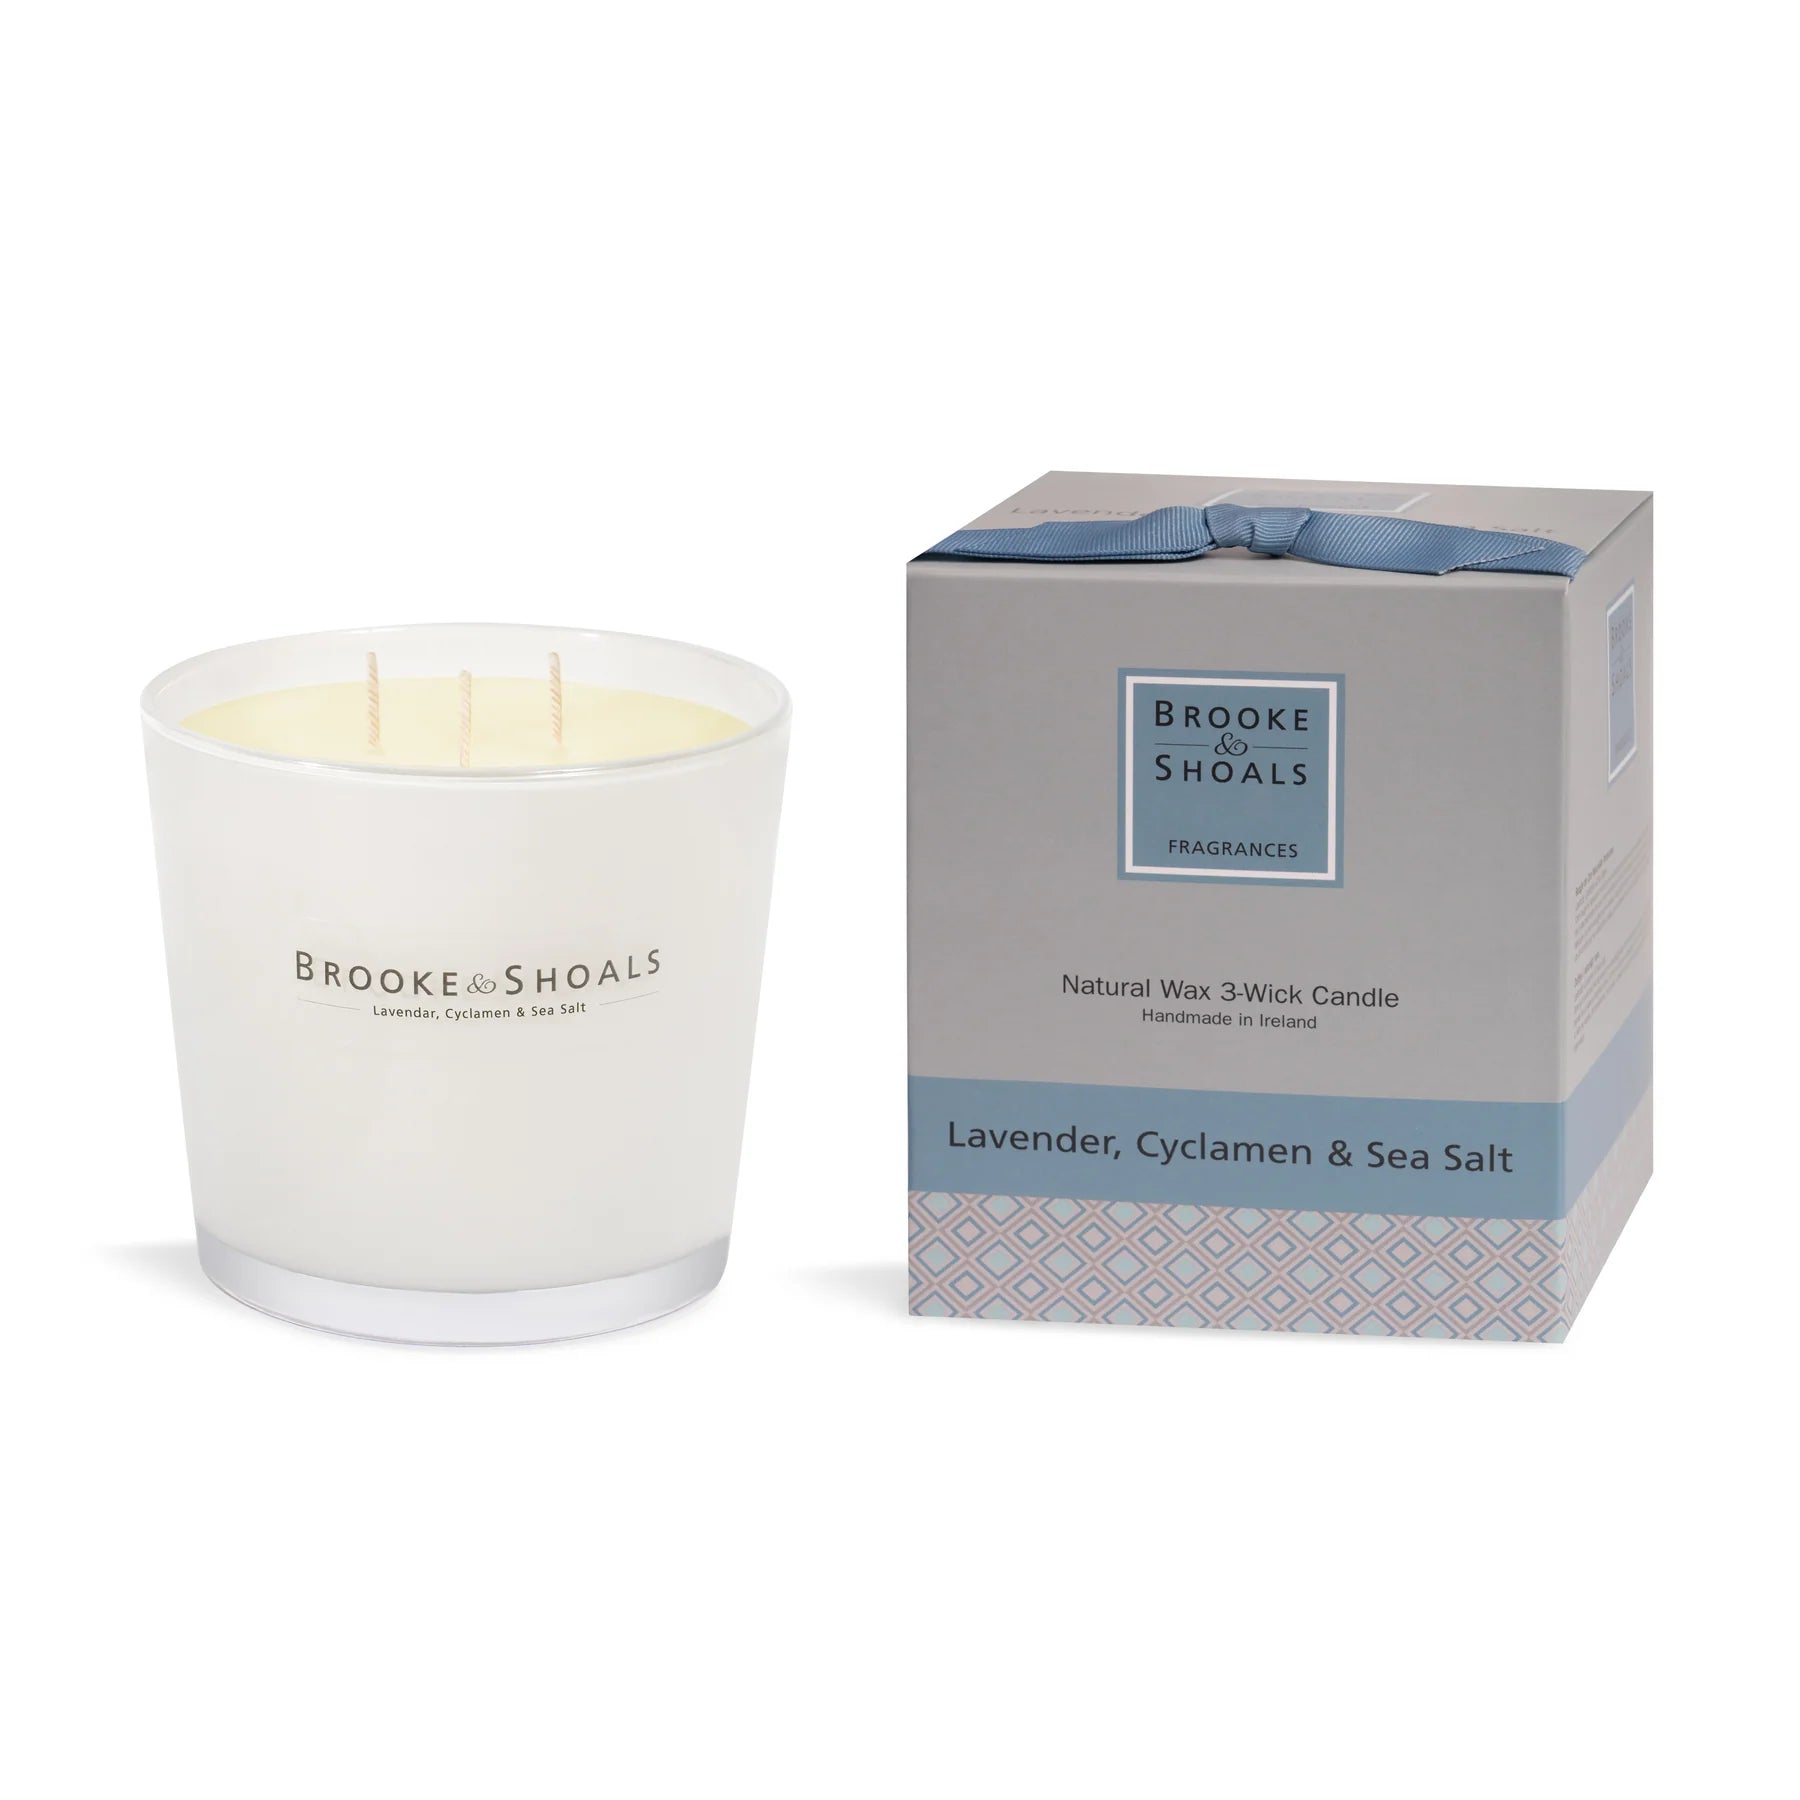 Fabulous Gifts Brooke & Shoals 3 Wick Candle Lavender Cyclamen & Seasalt by Weirs of Baggot Street